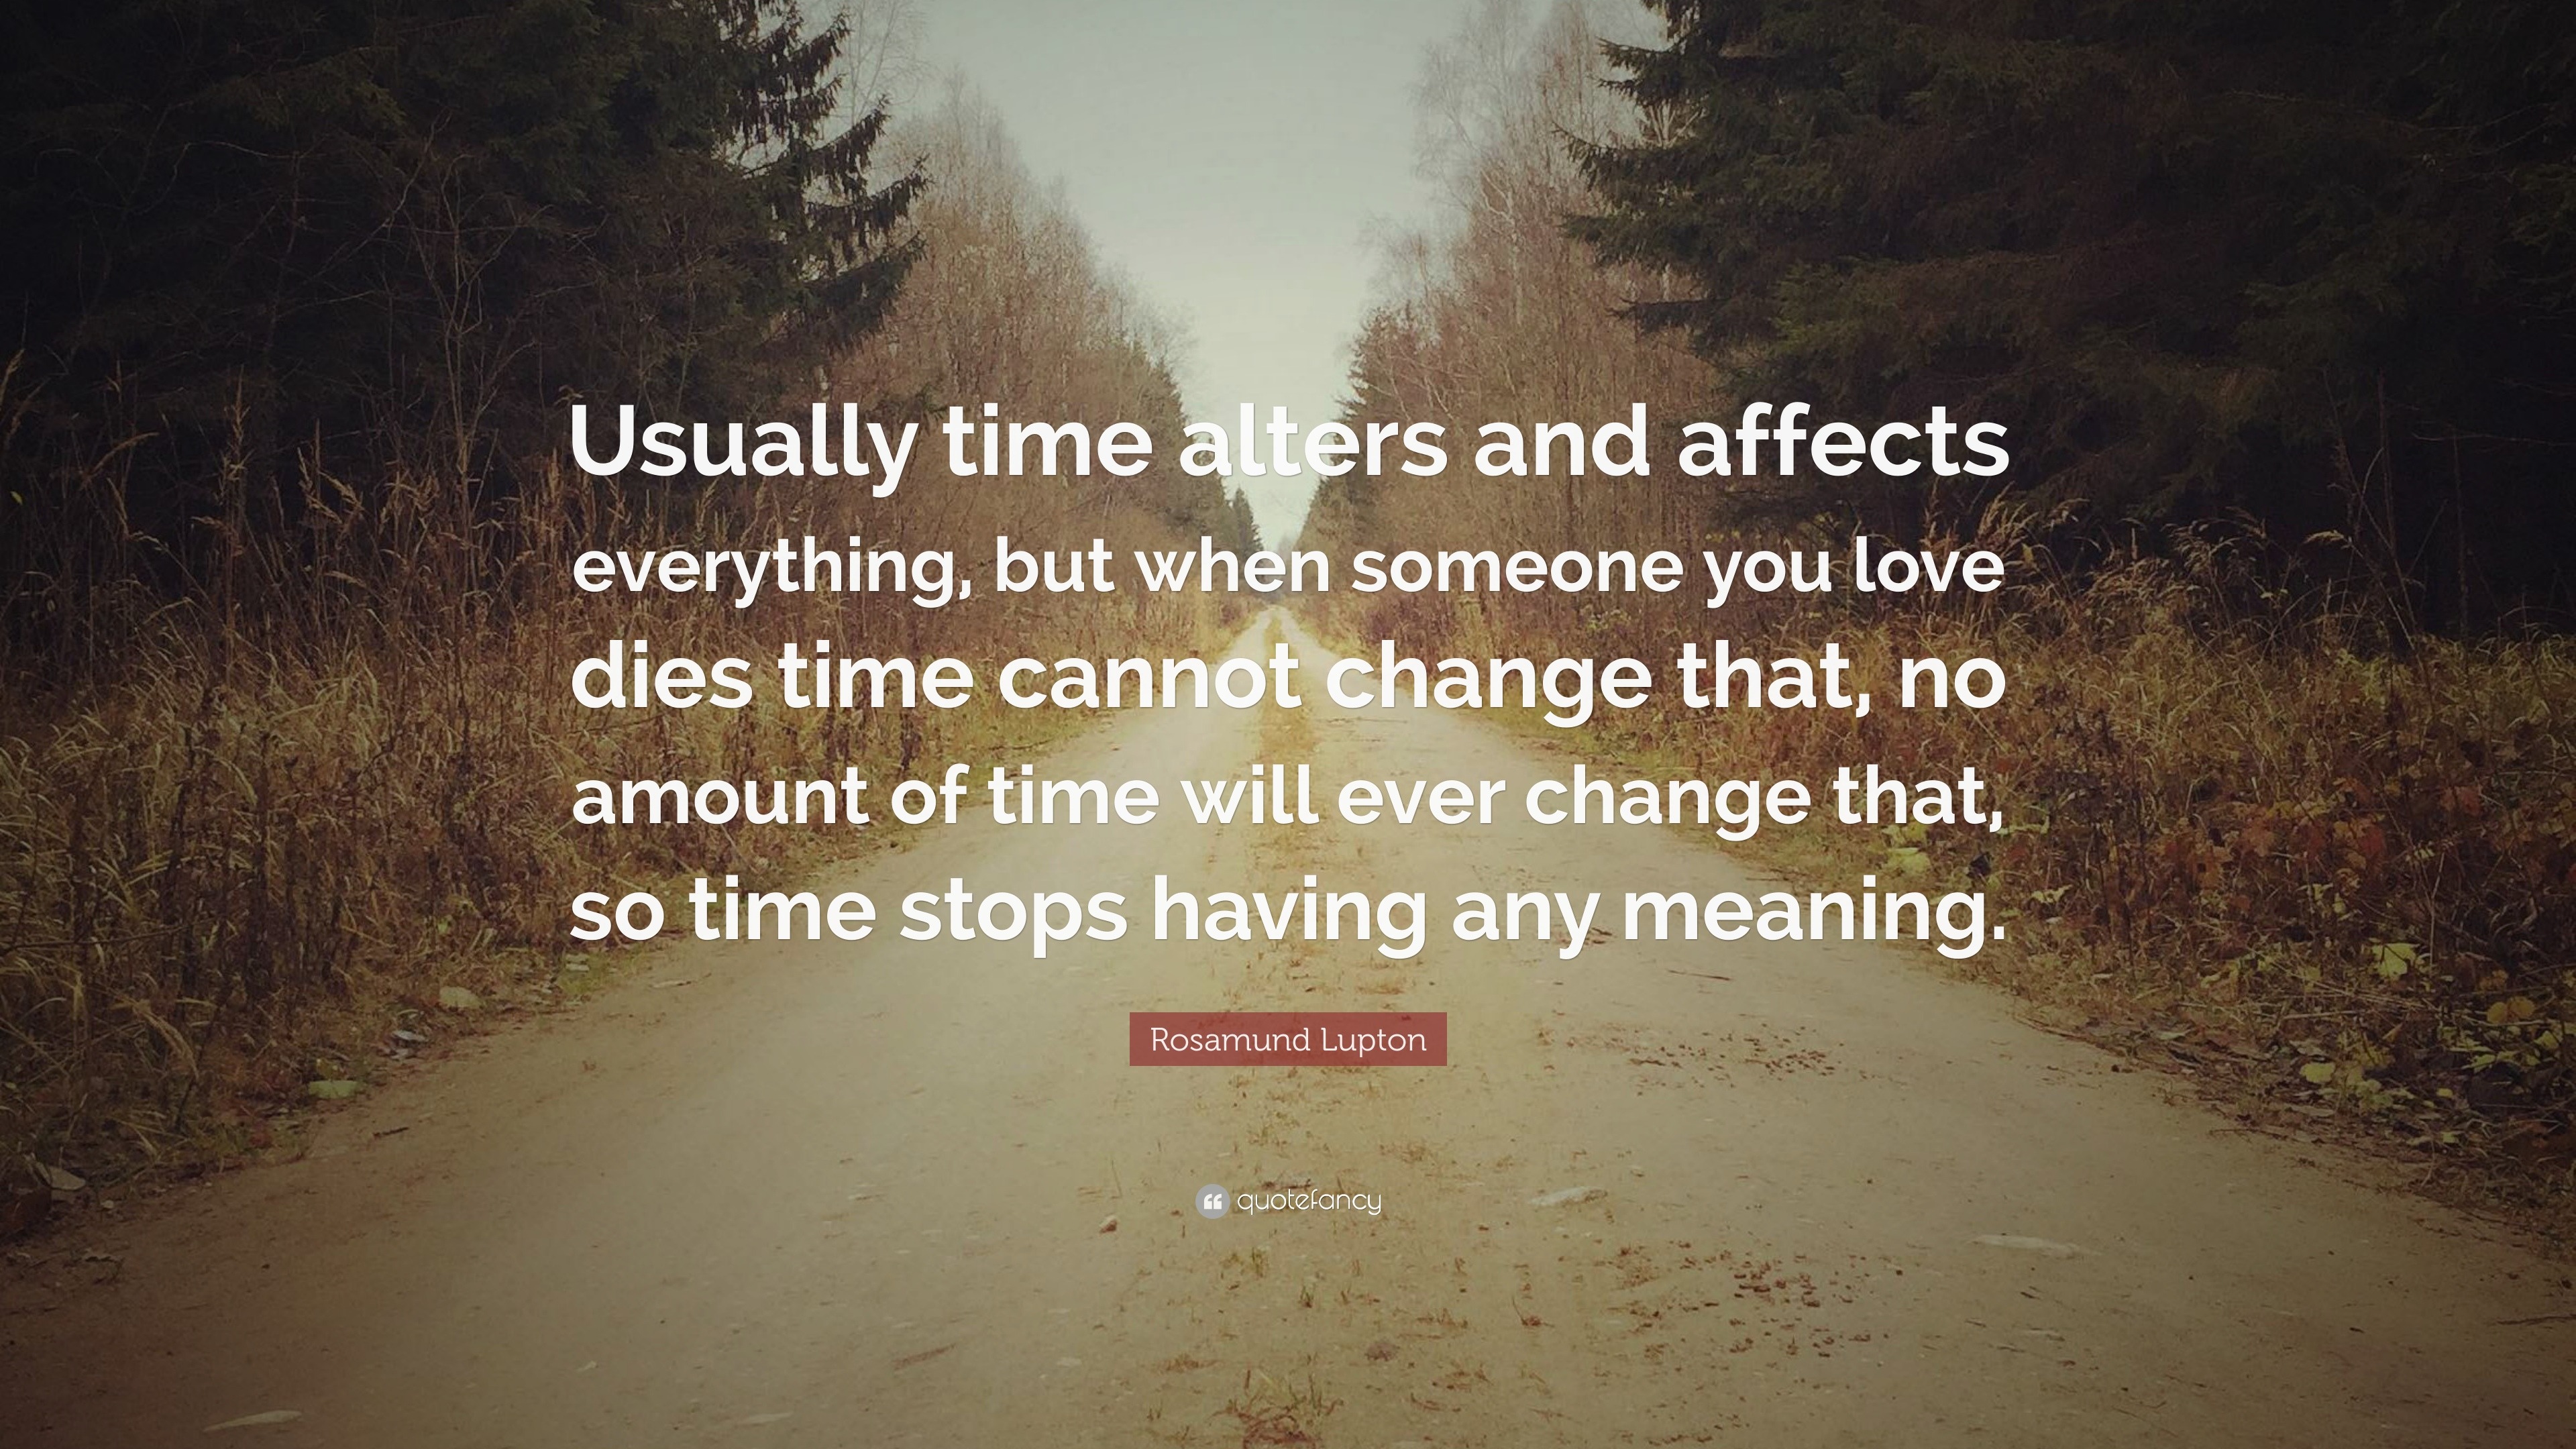 Rosamund Lupton Quote “Usually time alters and affects everything but when someone you